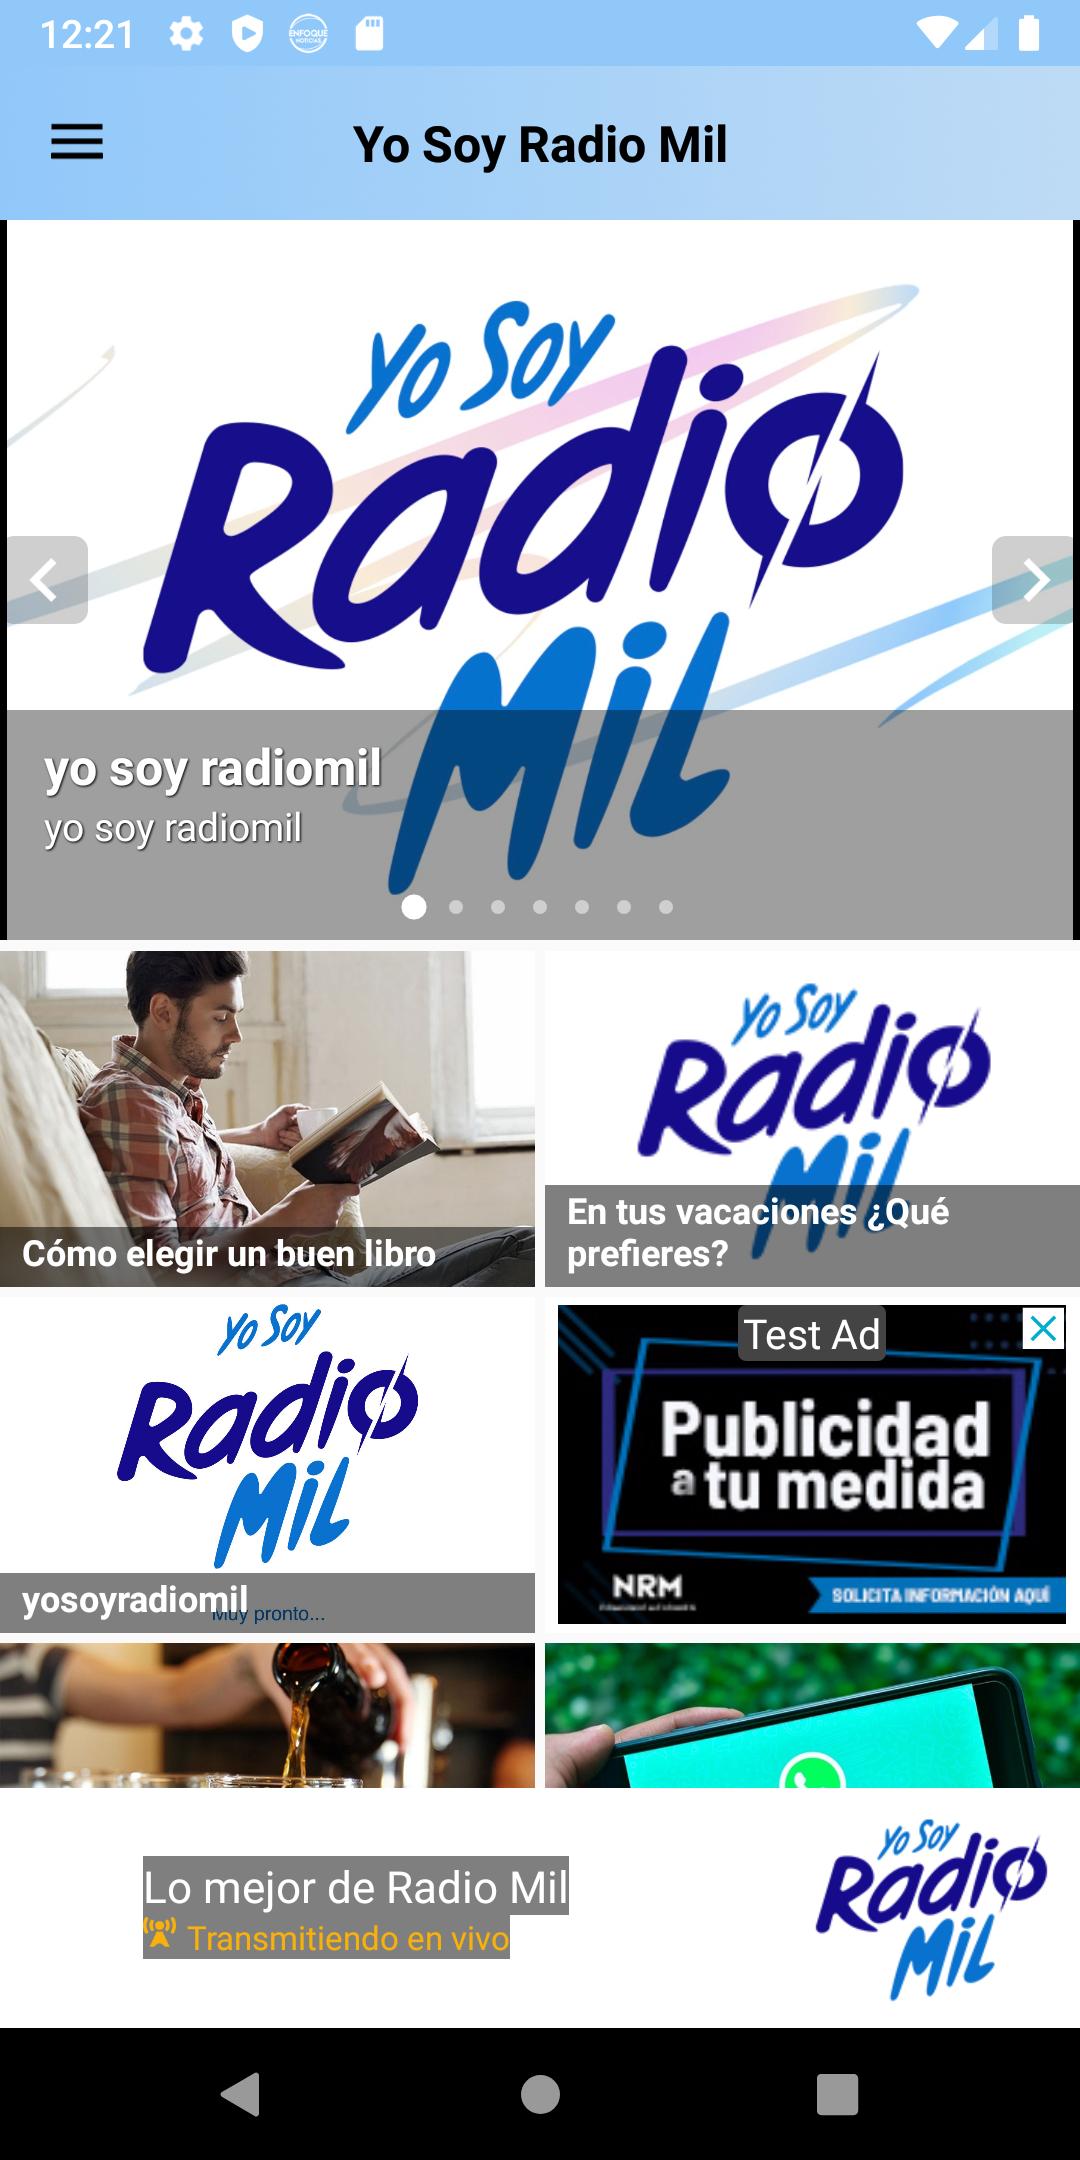 Yo Soy Radio Mil for Android - APK Download